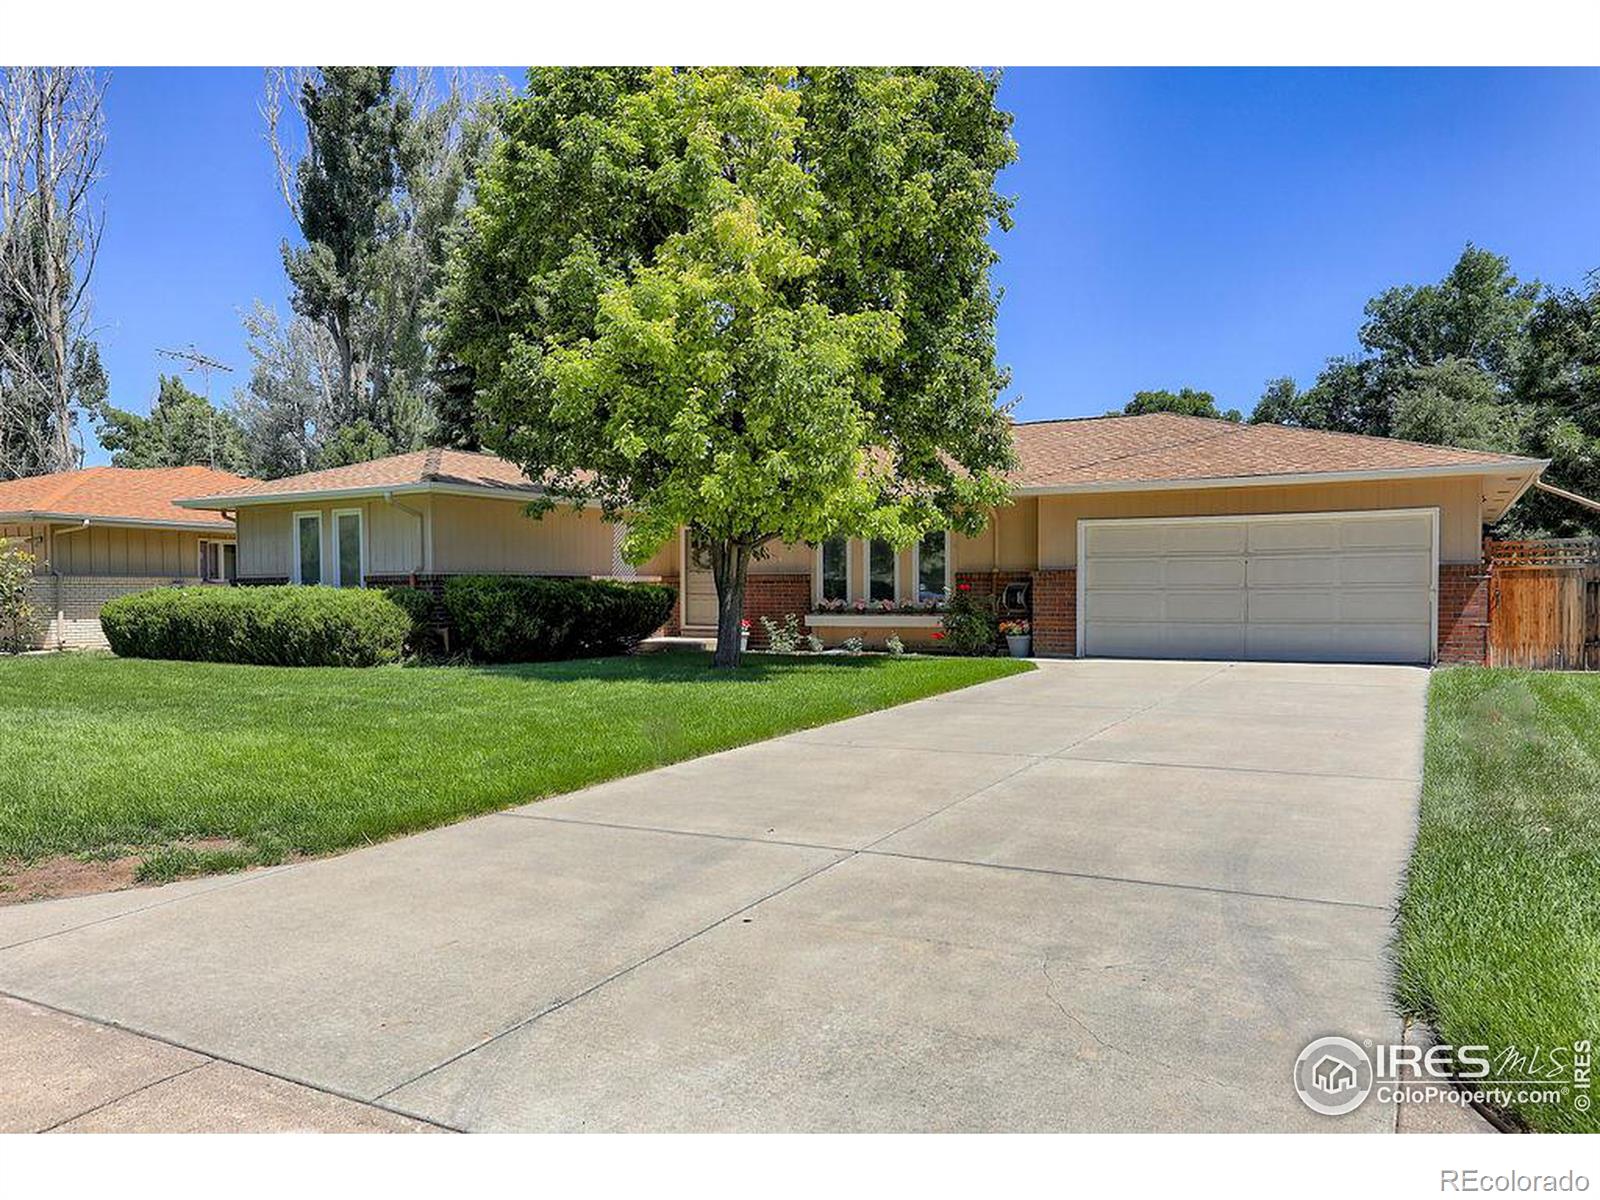 708  Parkview Drive, fort collins MLS: 123456789994432 Beds: 3 Baths: 2 Price: $508,000